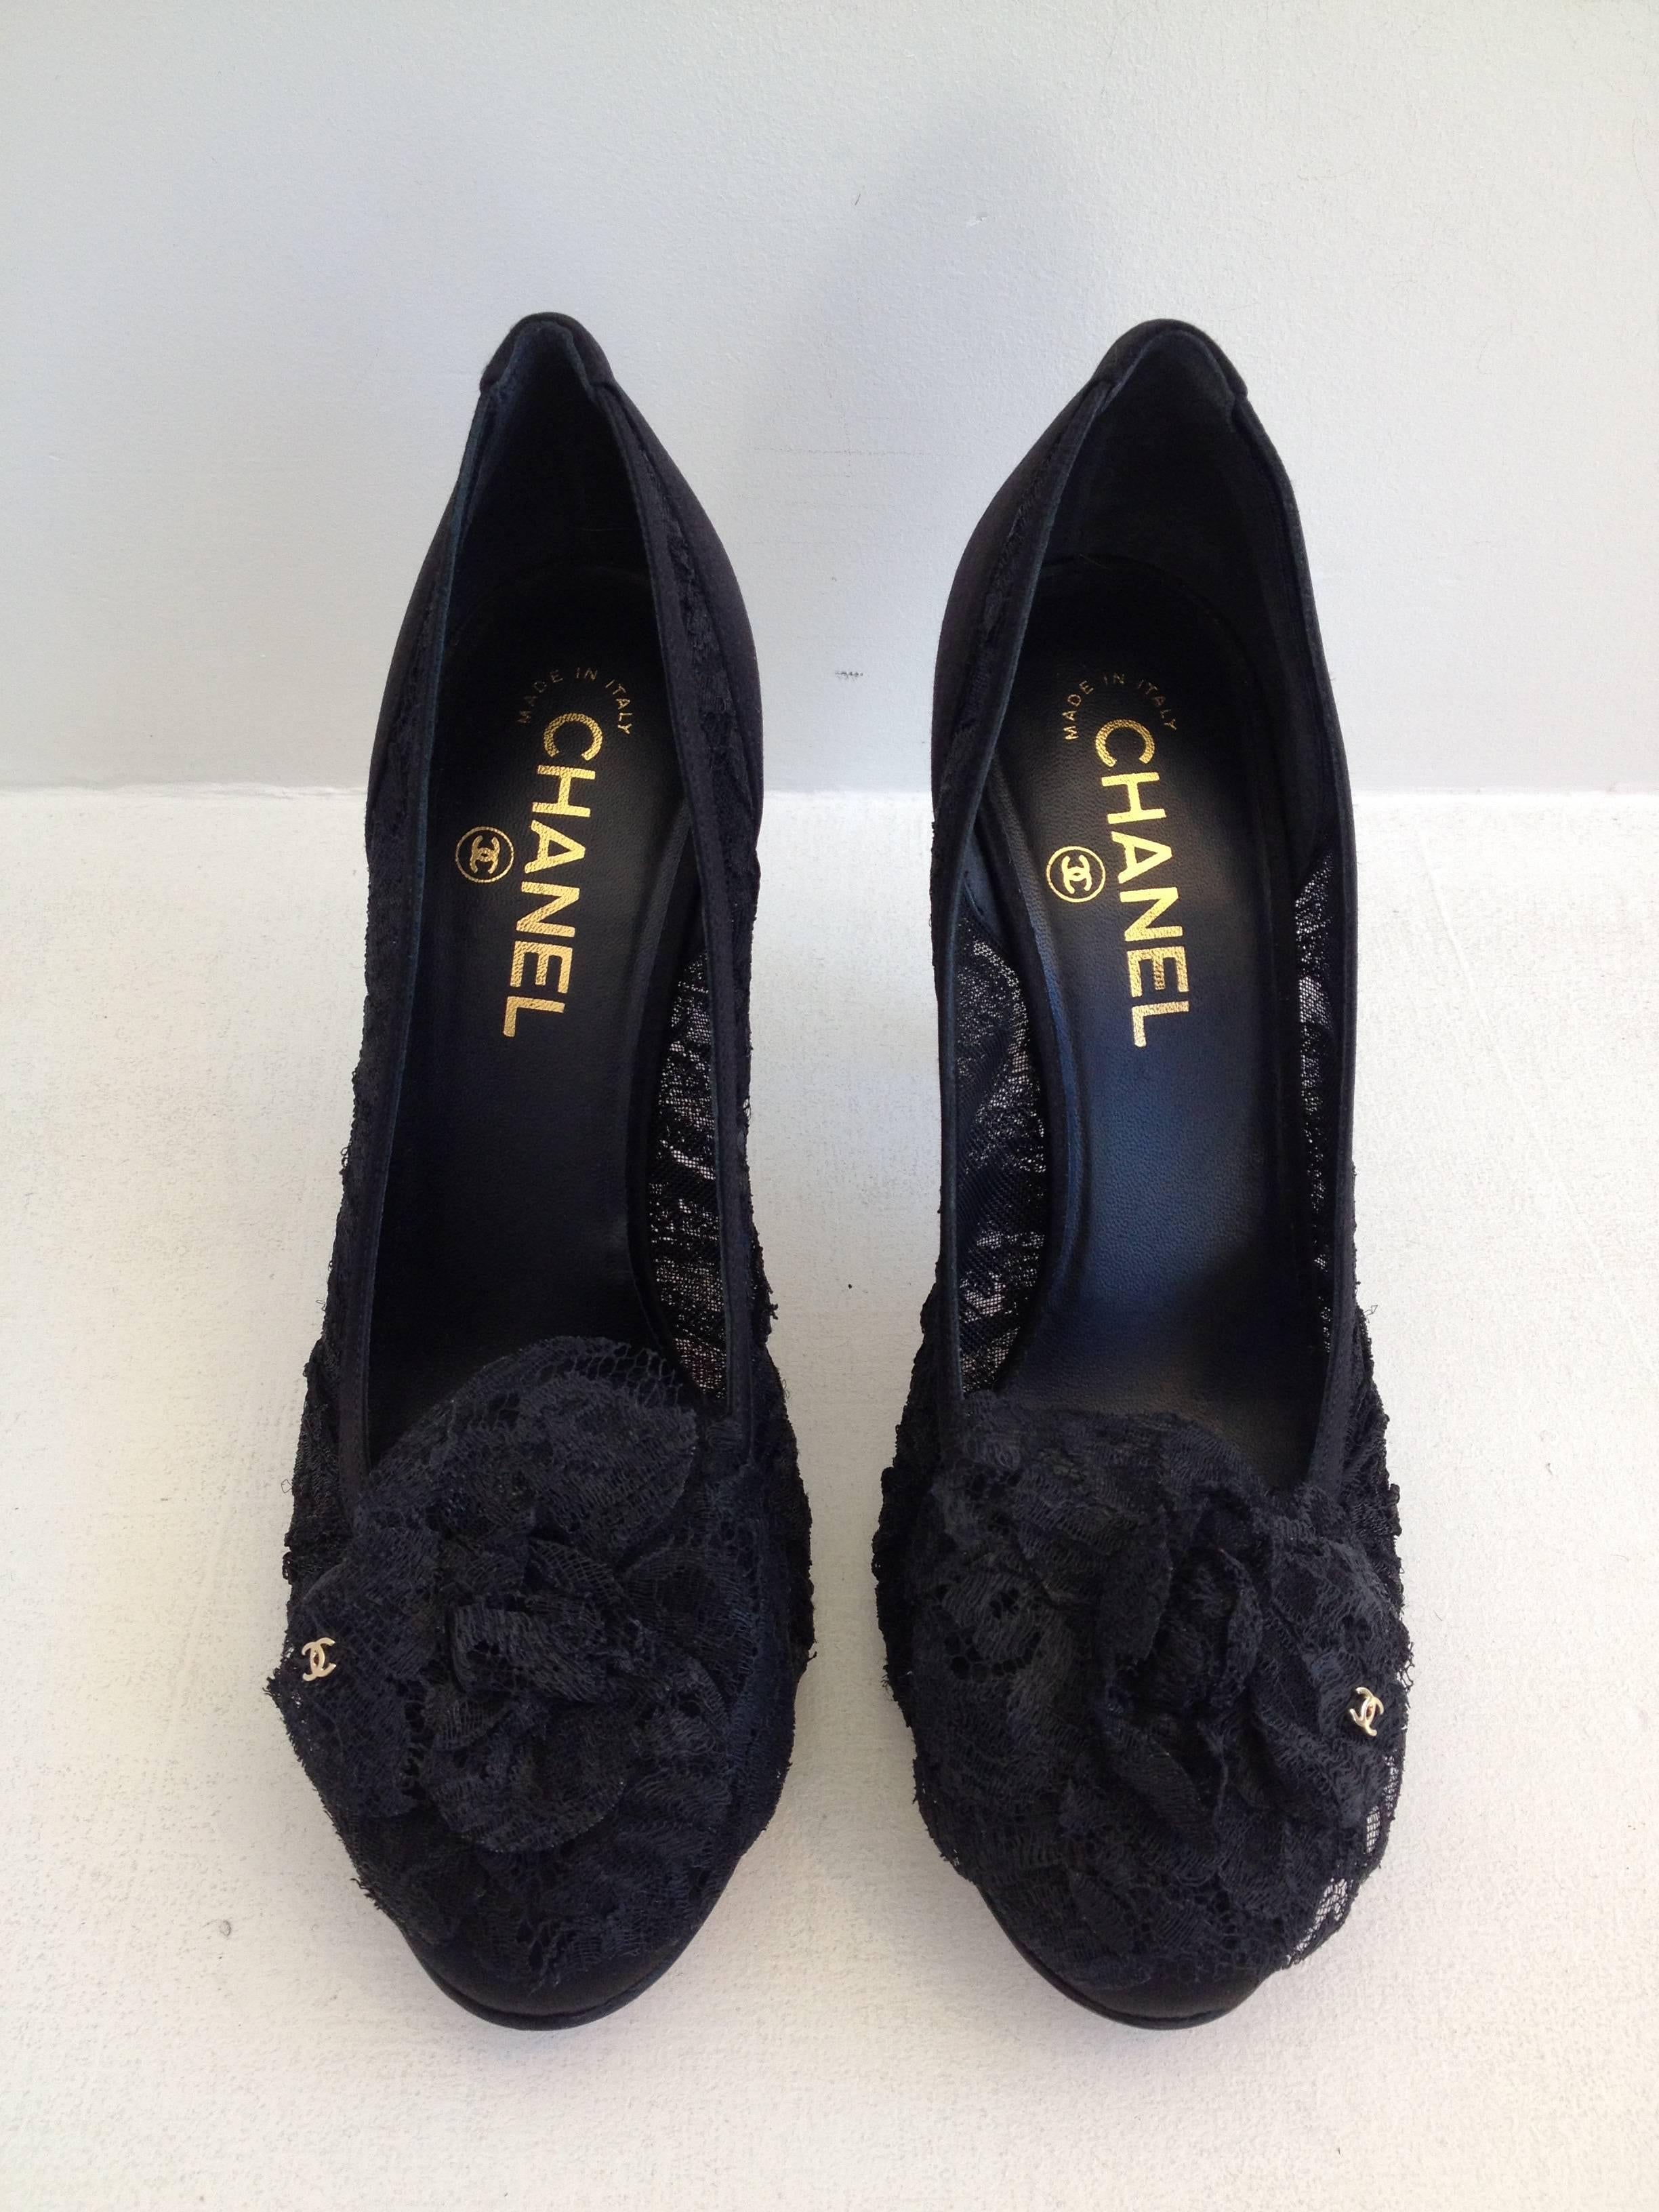 Delicate and feminine lace makes this pair of classic Chanel pumps truly exquisite. The toe is decorated with an iconic camellia made from the same black lace, which is adorned with a gold double C logo. These are a perfectly timeless pair of heels